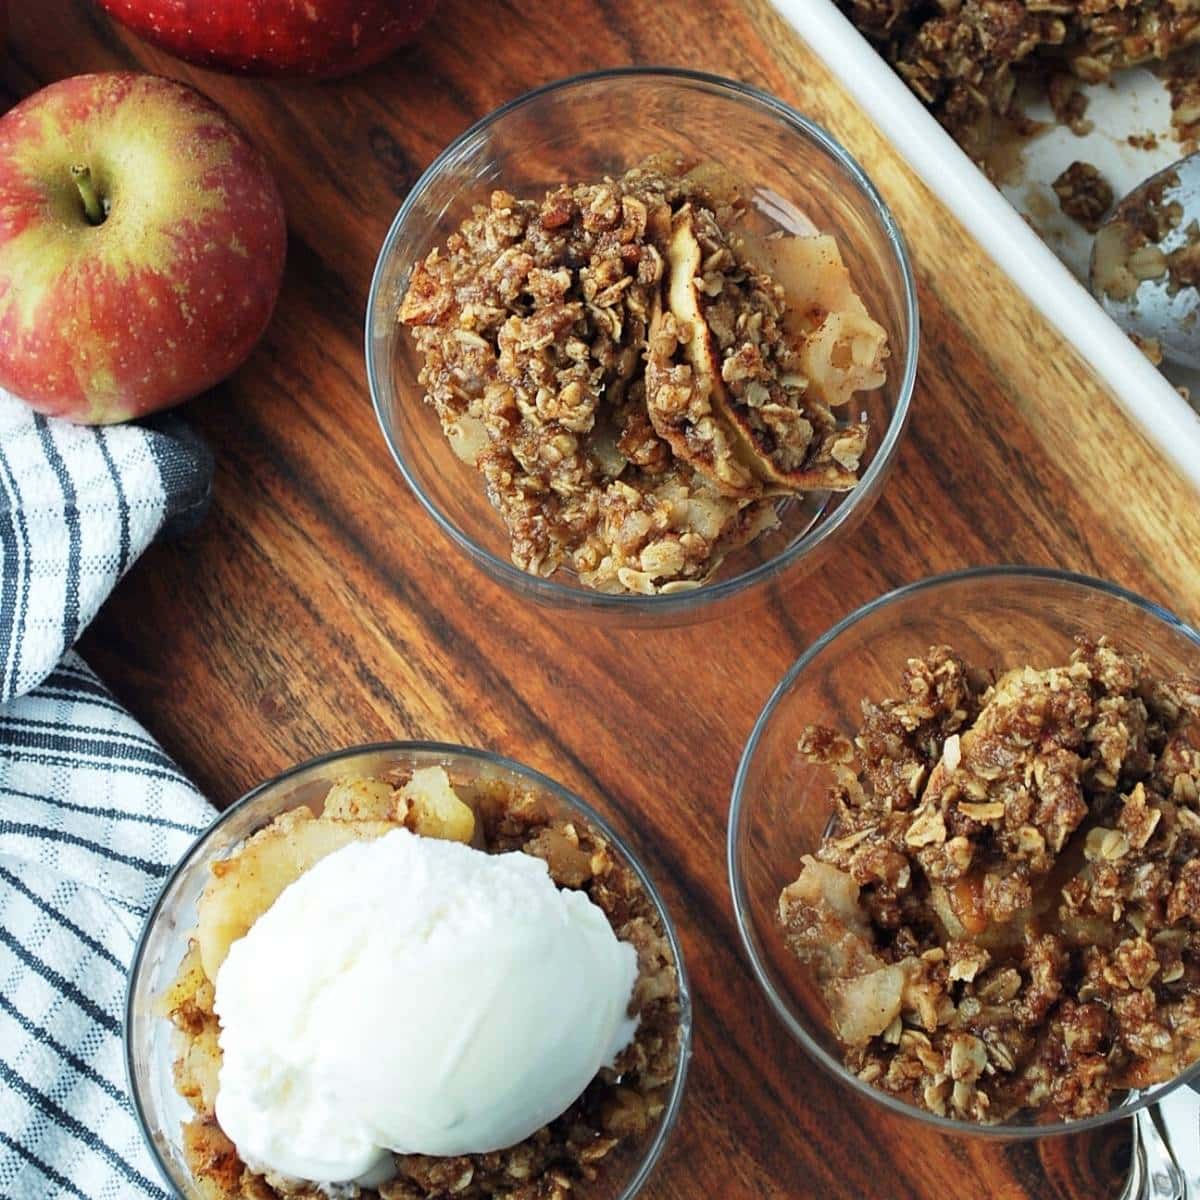 three parfait dishes with sugar free apple crisp with a scoop of ice cream on top of one serving